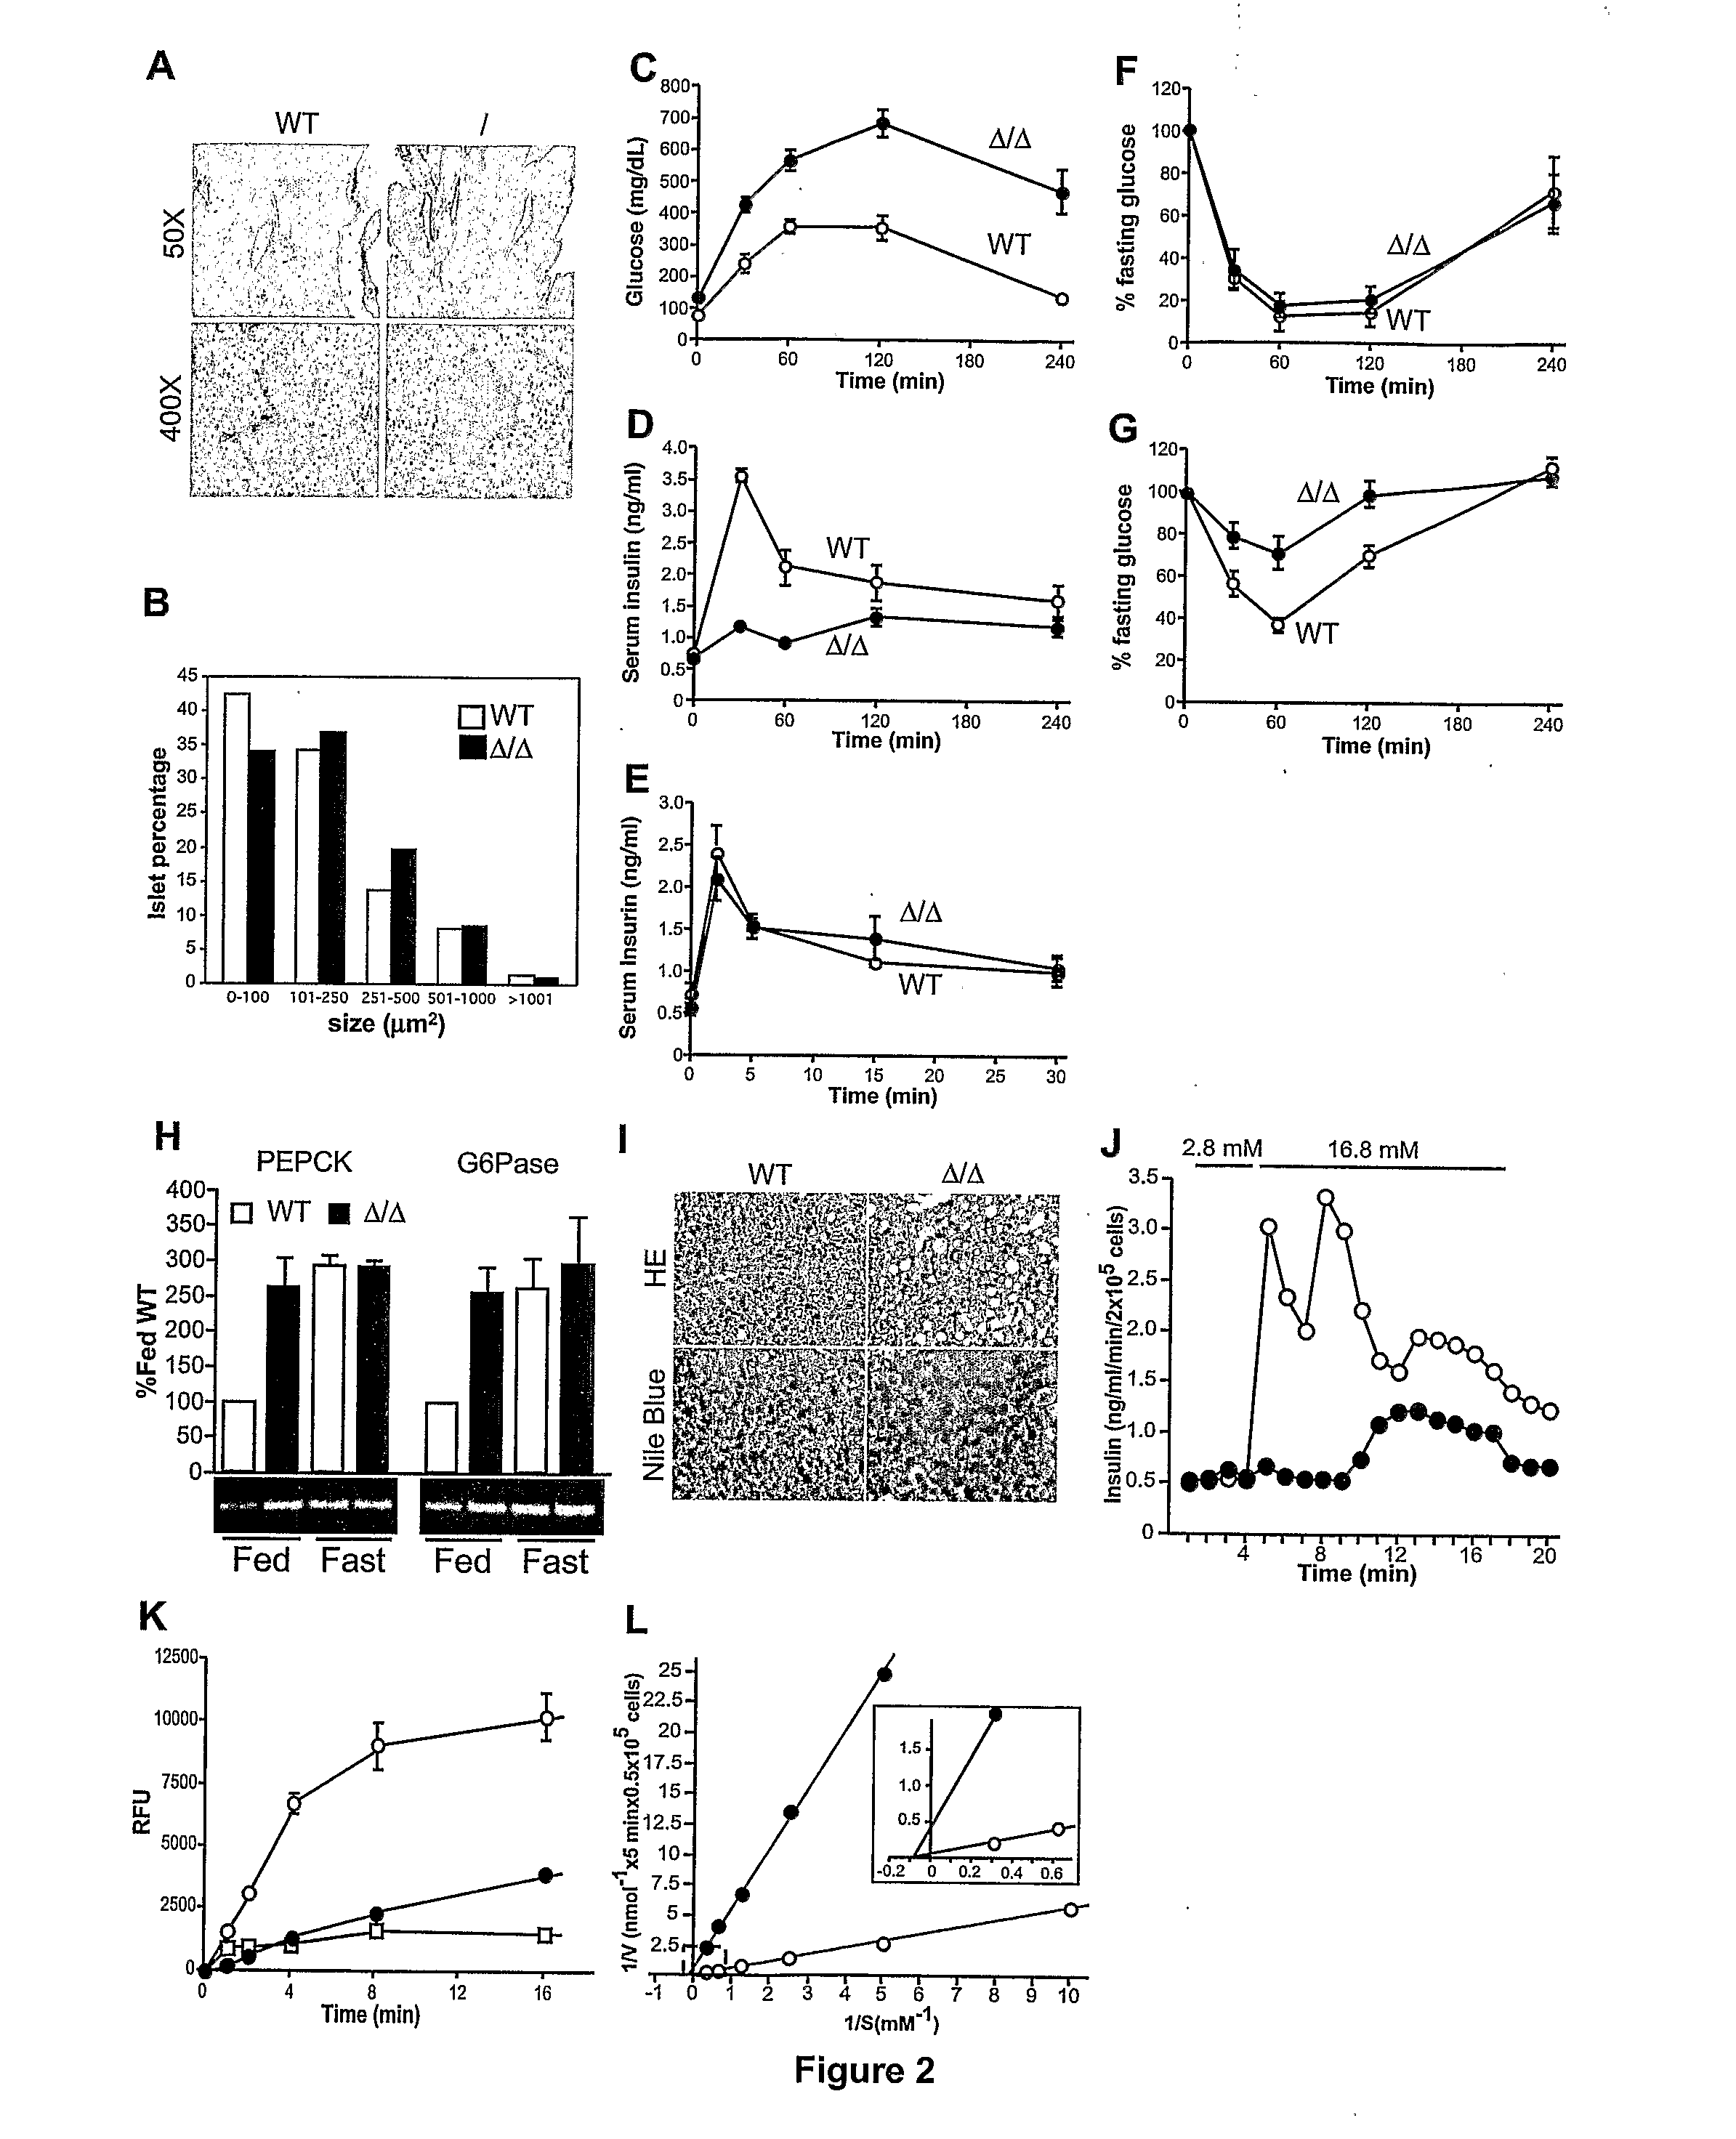 Regulation of glucose and insulin levels by gnt-4 glycosyltransferase activity